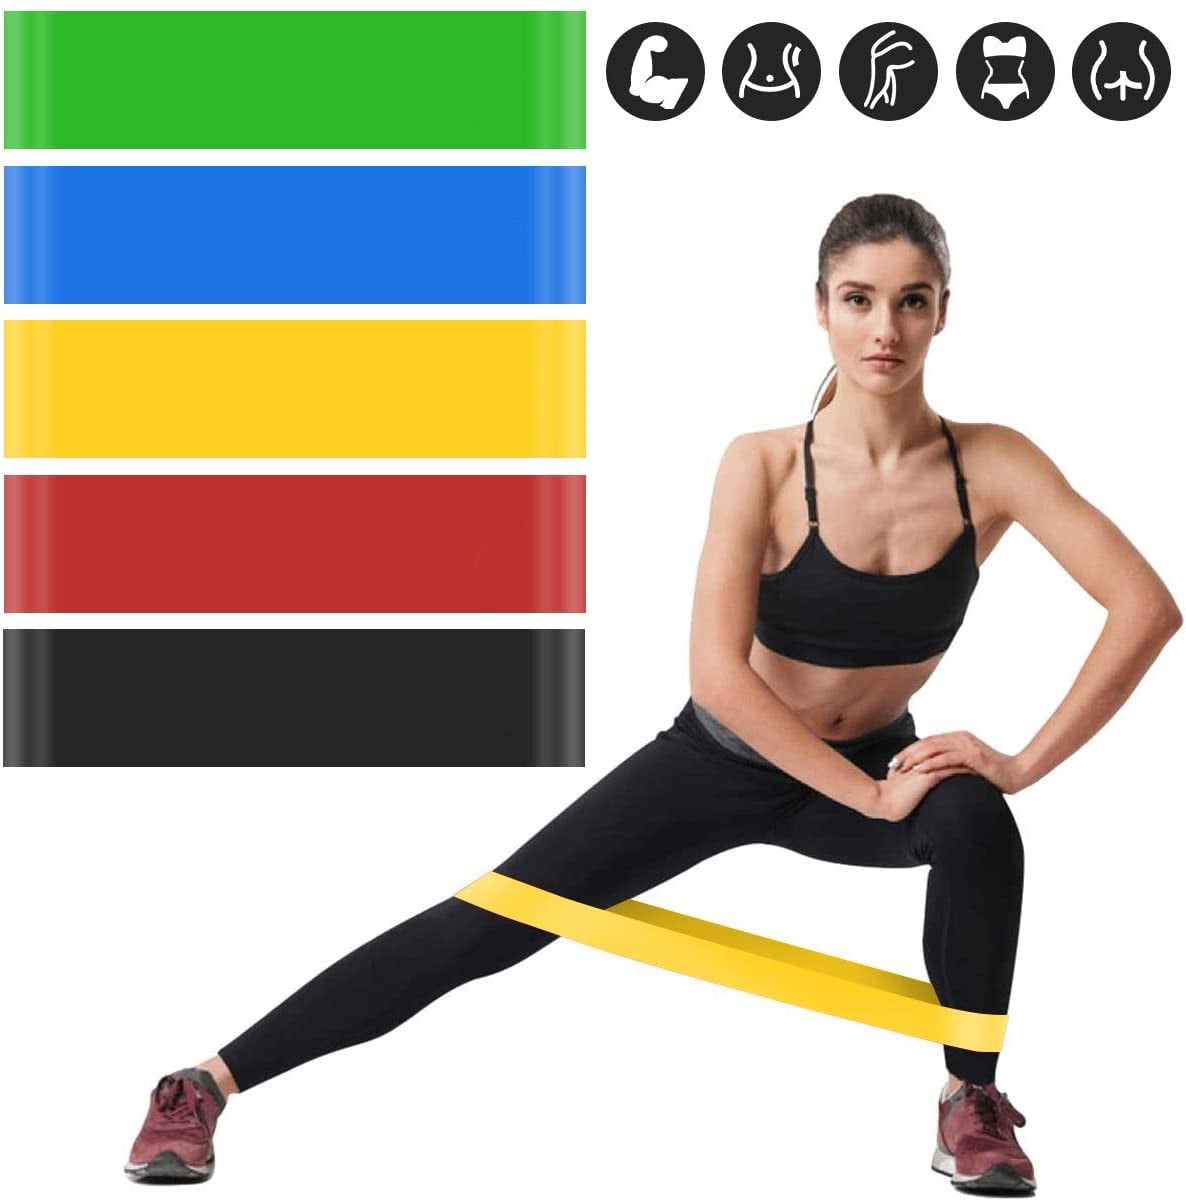 Picnic and Other Outdoor Activities rfrrsss 2019 New Resistance Bands Loop Set Exercise Sports Fitness Home Gym Yoga Latex Necessaries for Camping